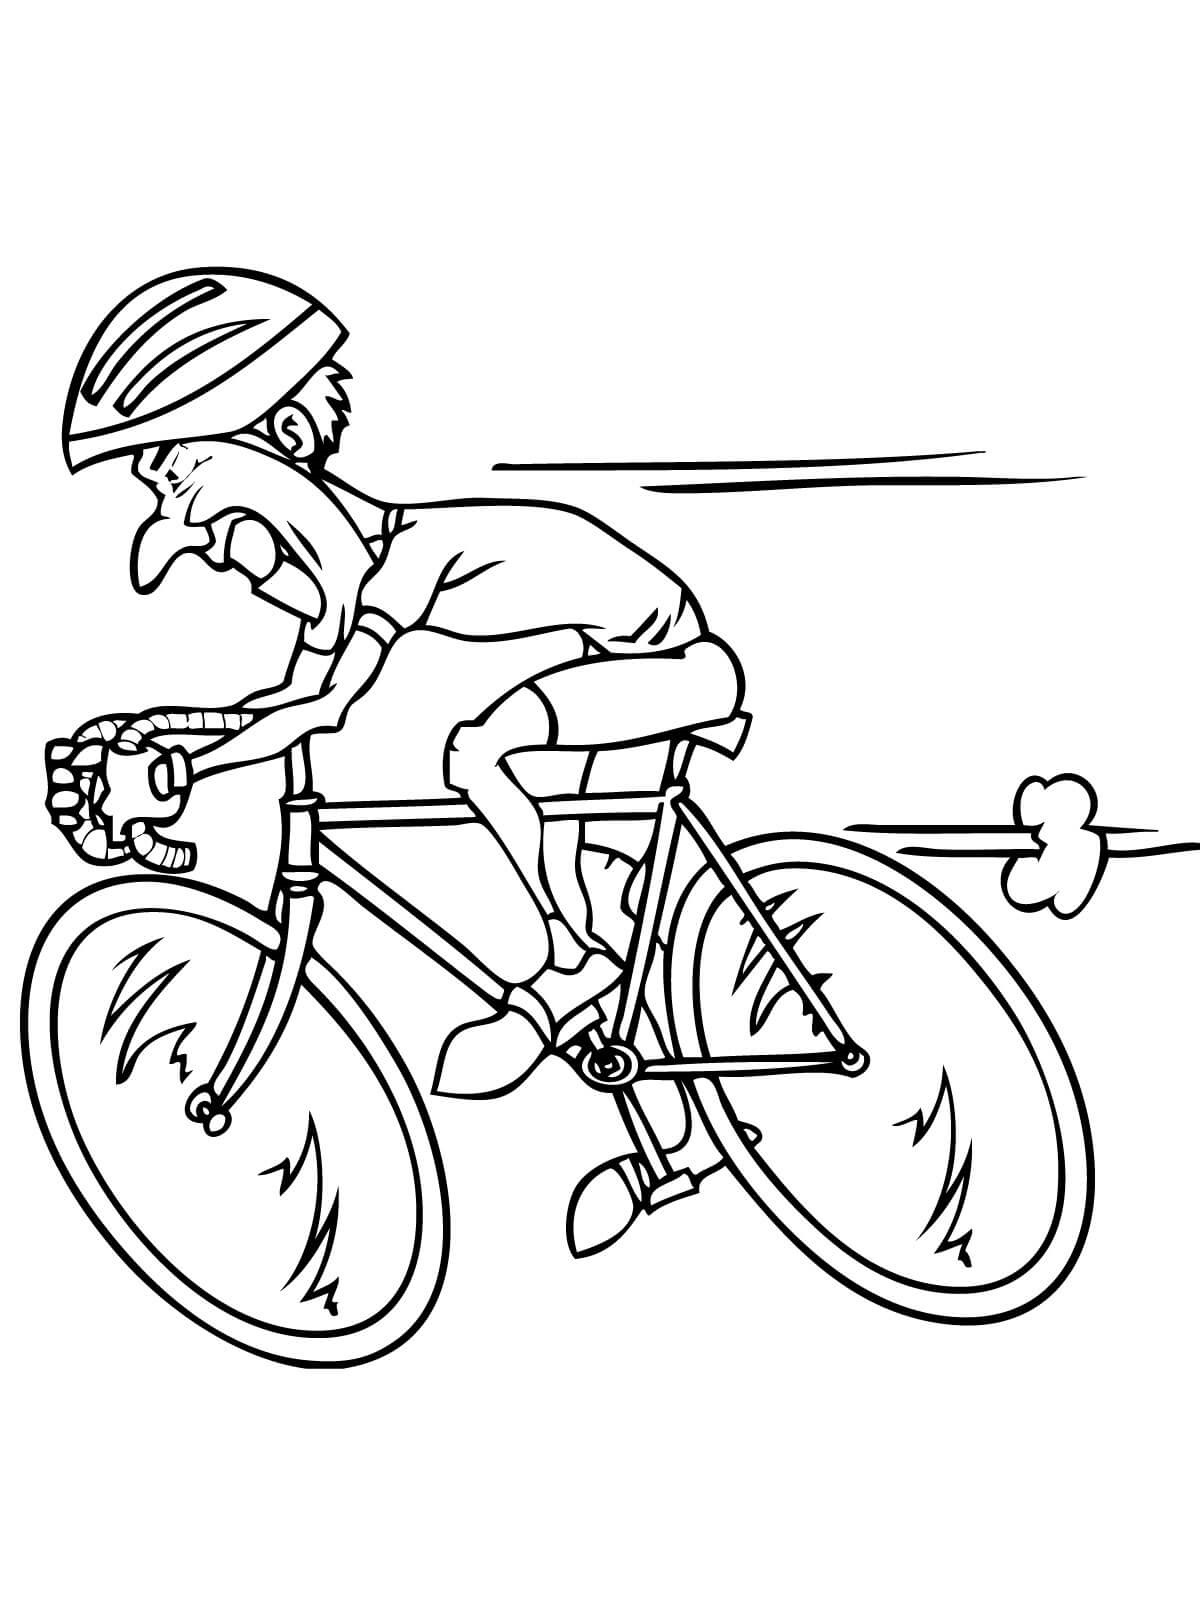 Bike Racing Coloring Page - Free Printable Coloring Pages for Kids